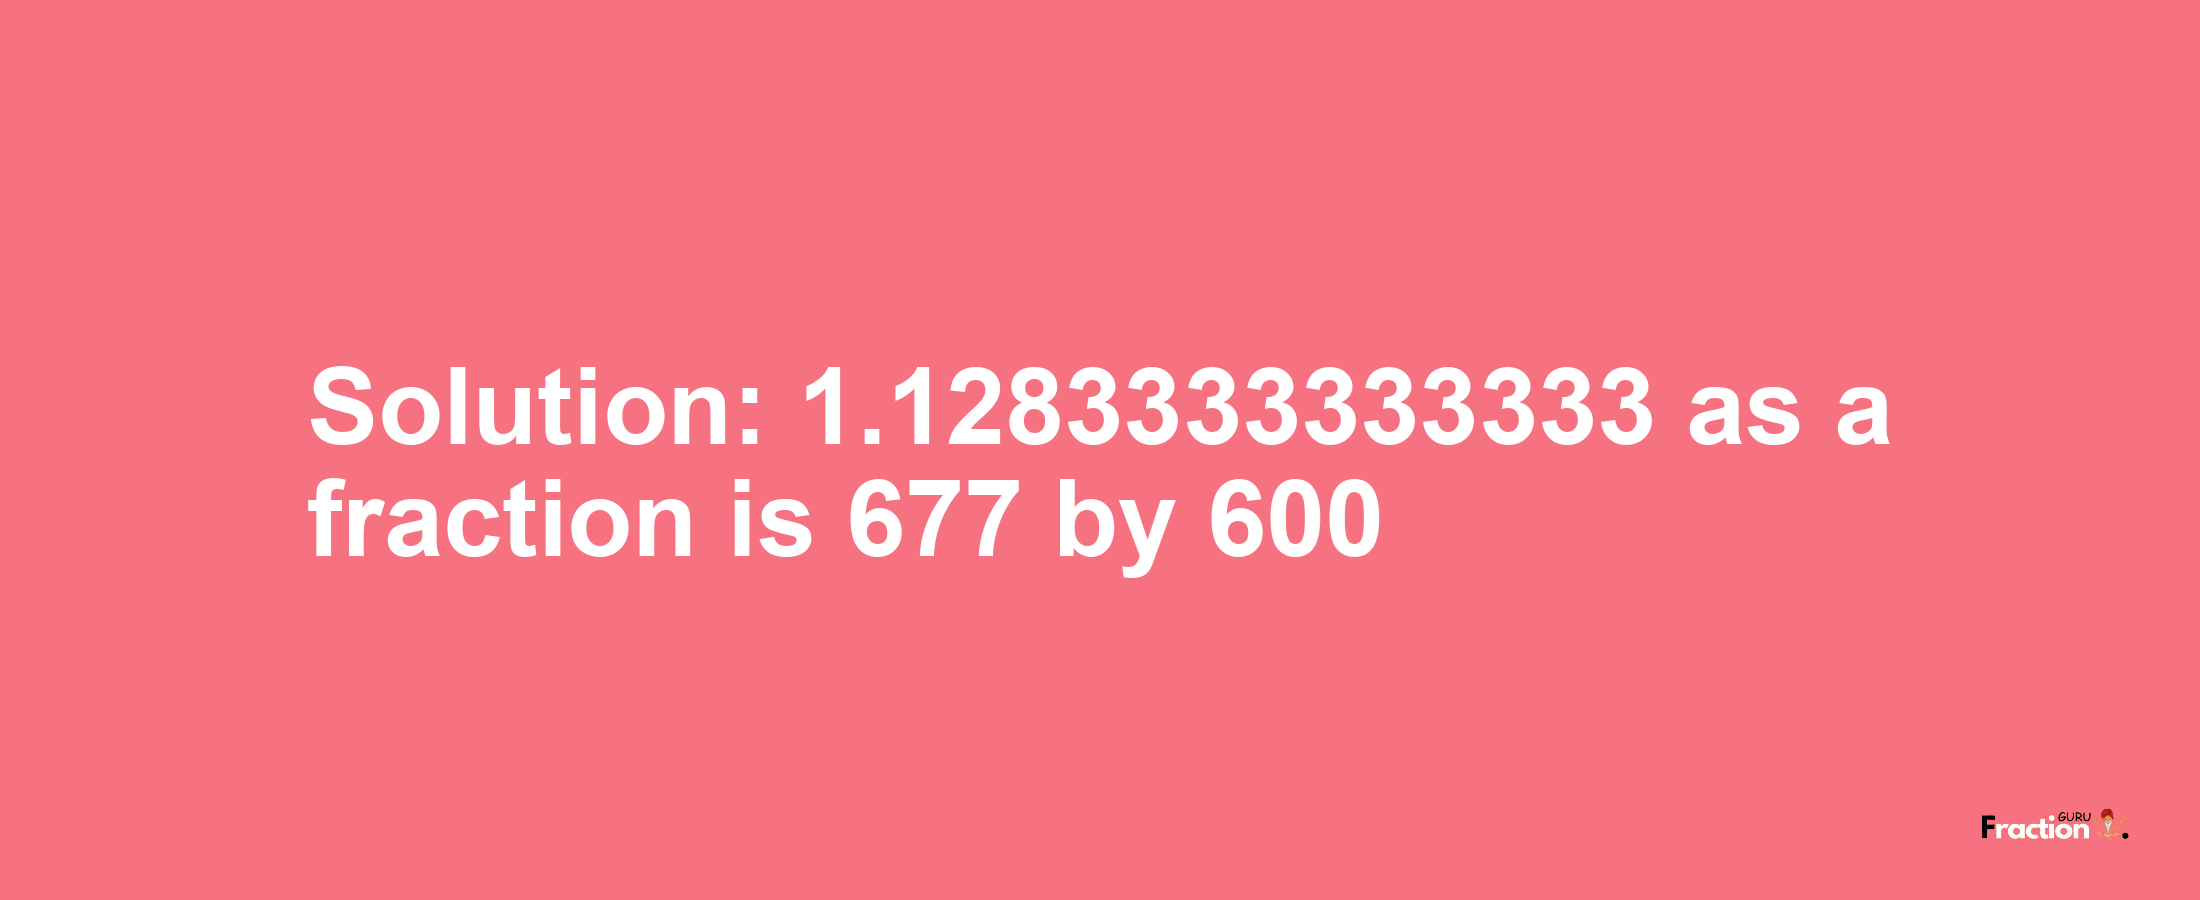 Solution:1.1283333333333 as a fraction is 677/600